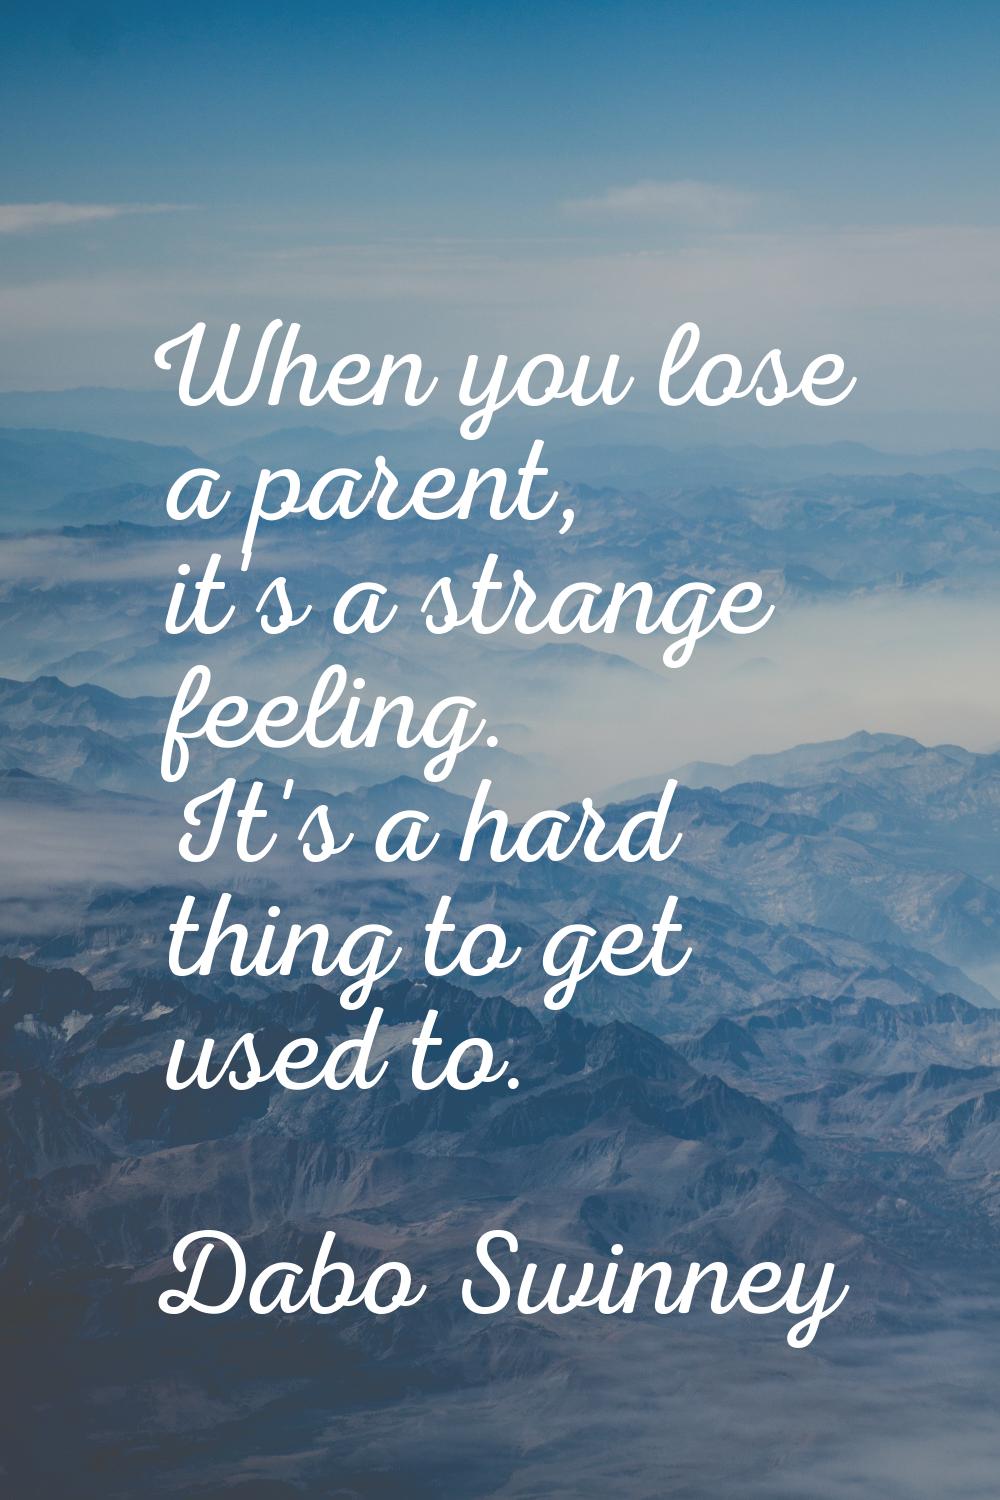 When you lose a parent, it's a strange feeling. It's a hard thing to get used to.